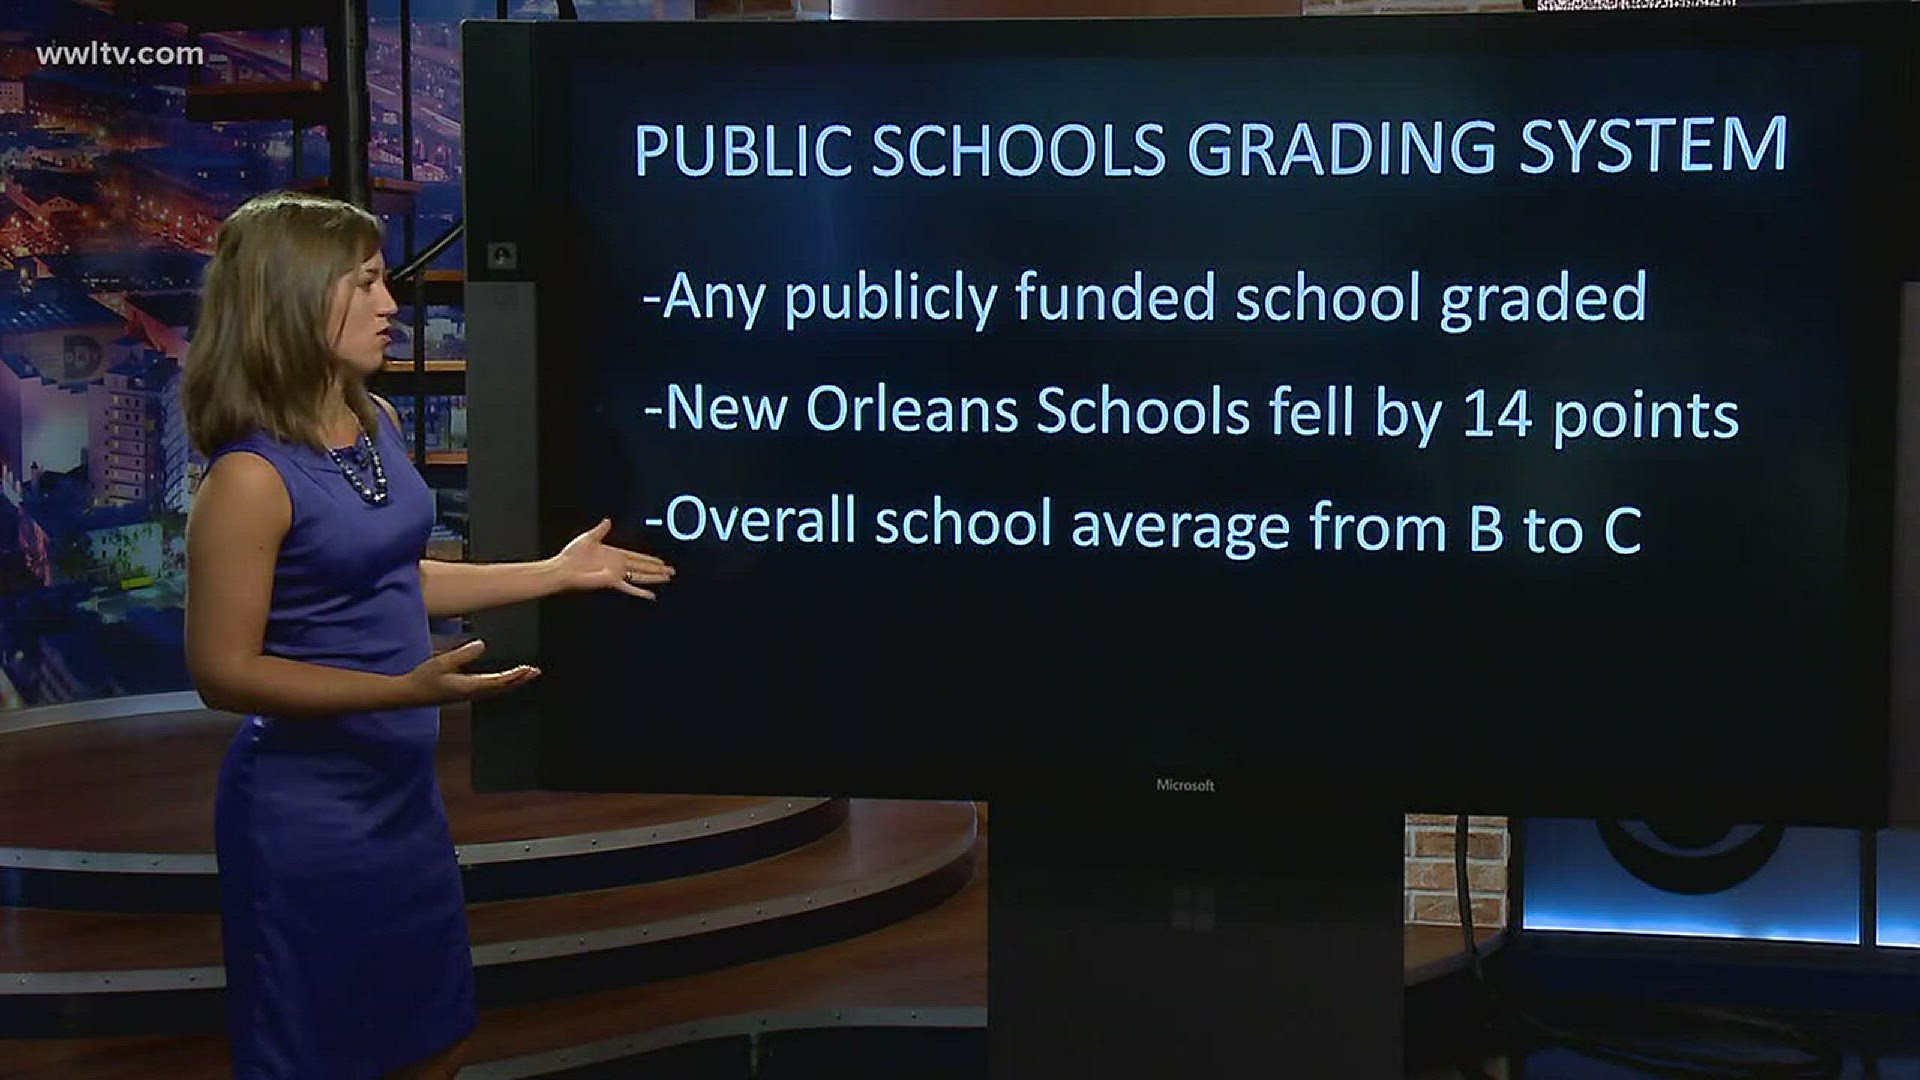 New Orleans area schools see drop in performance scores